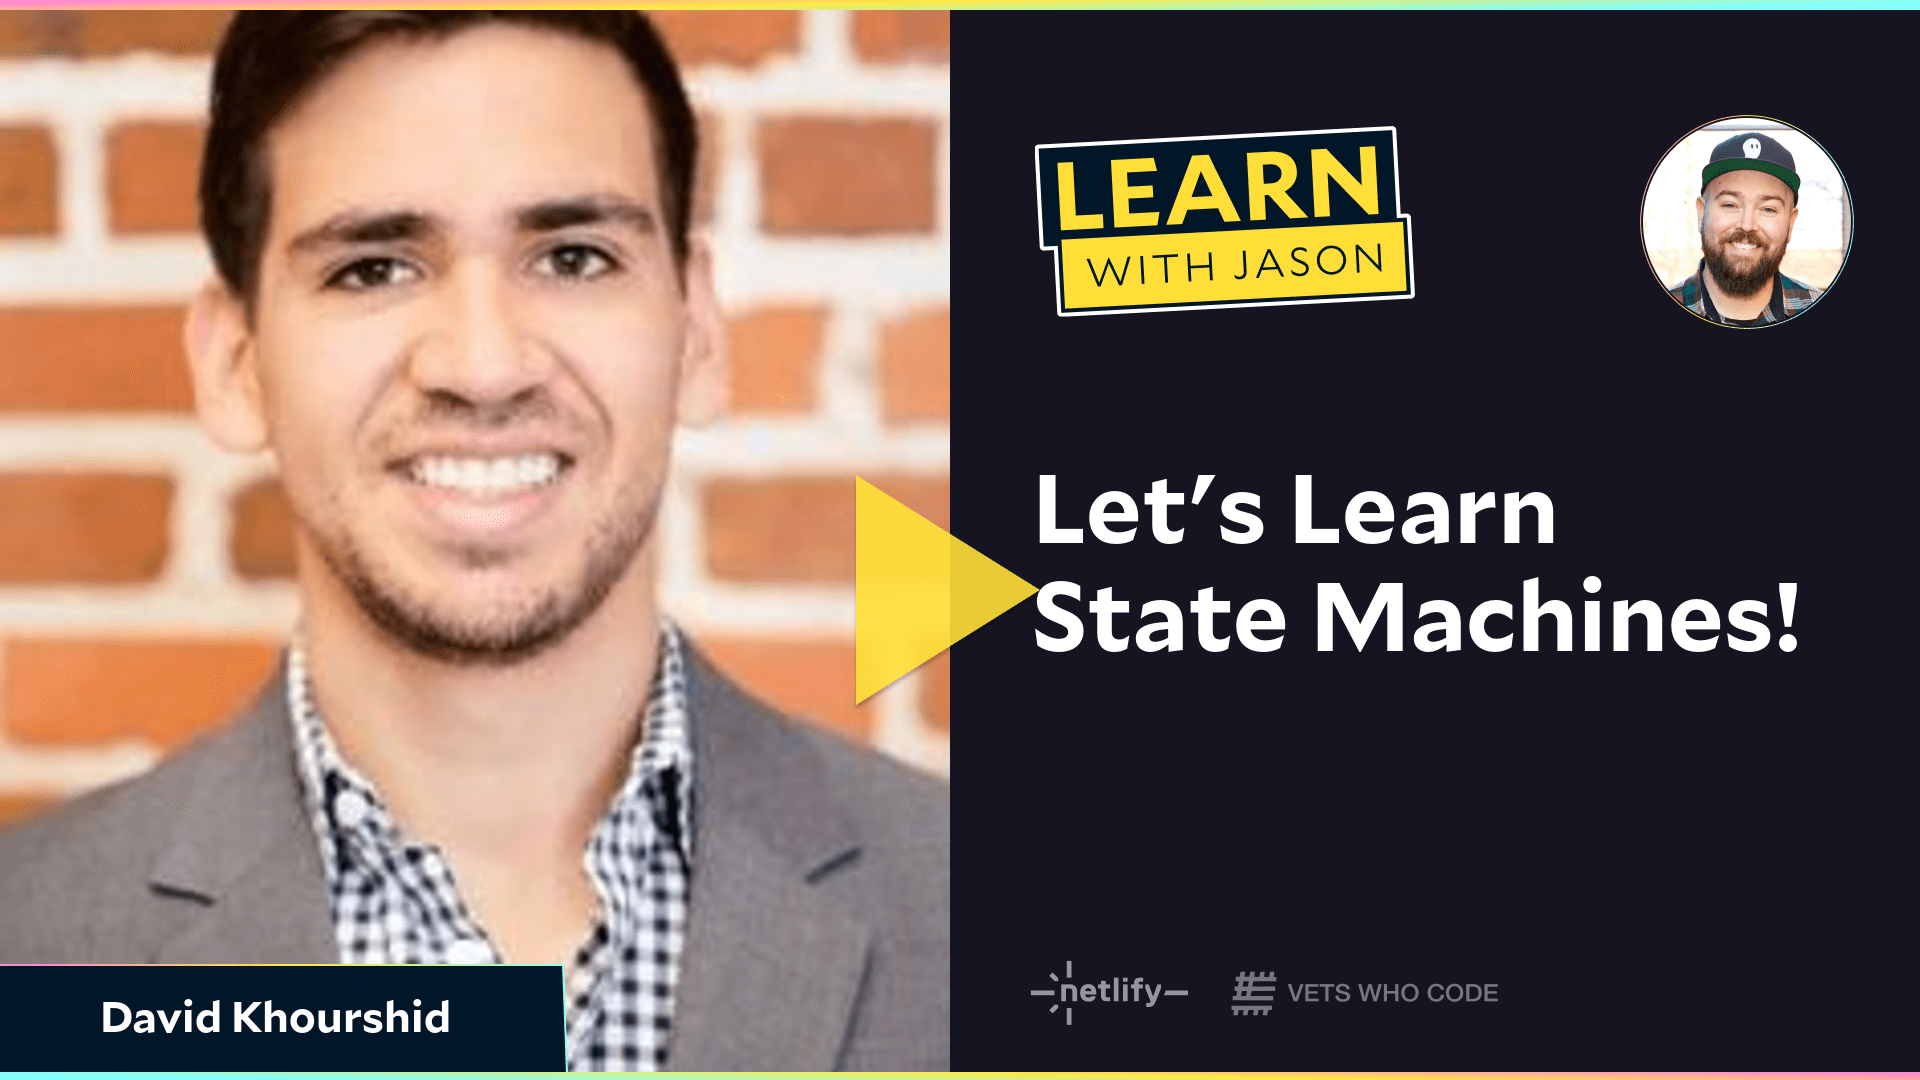 Let's Learn State Machines! (with David Khourshid)